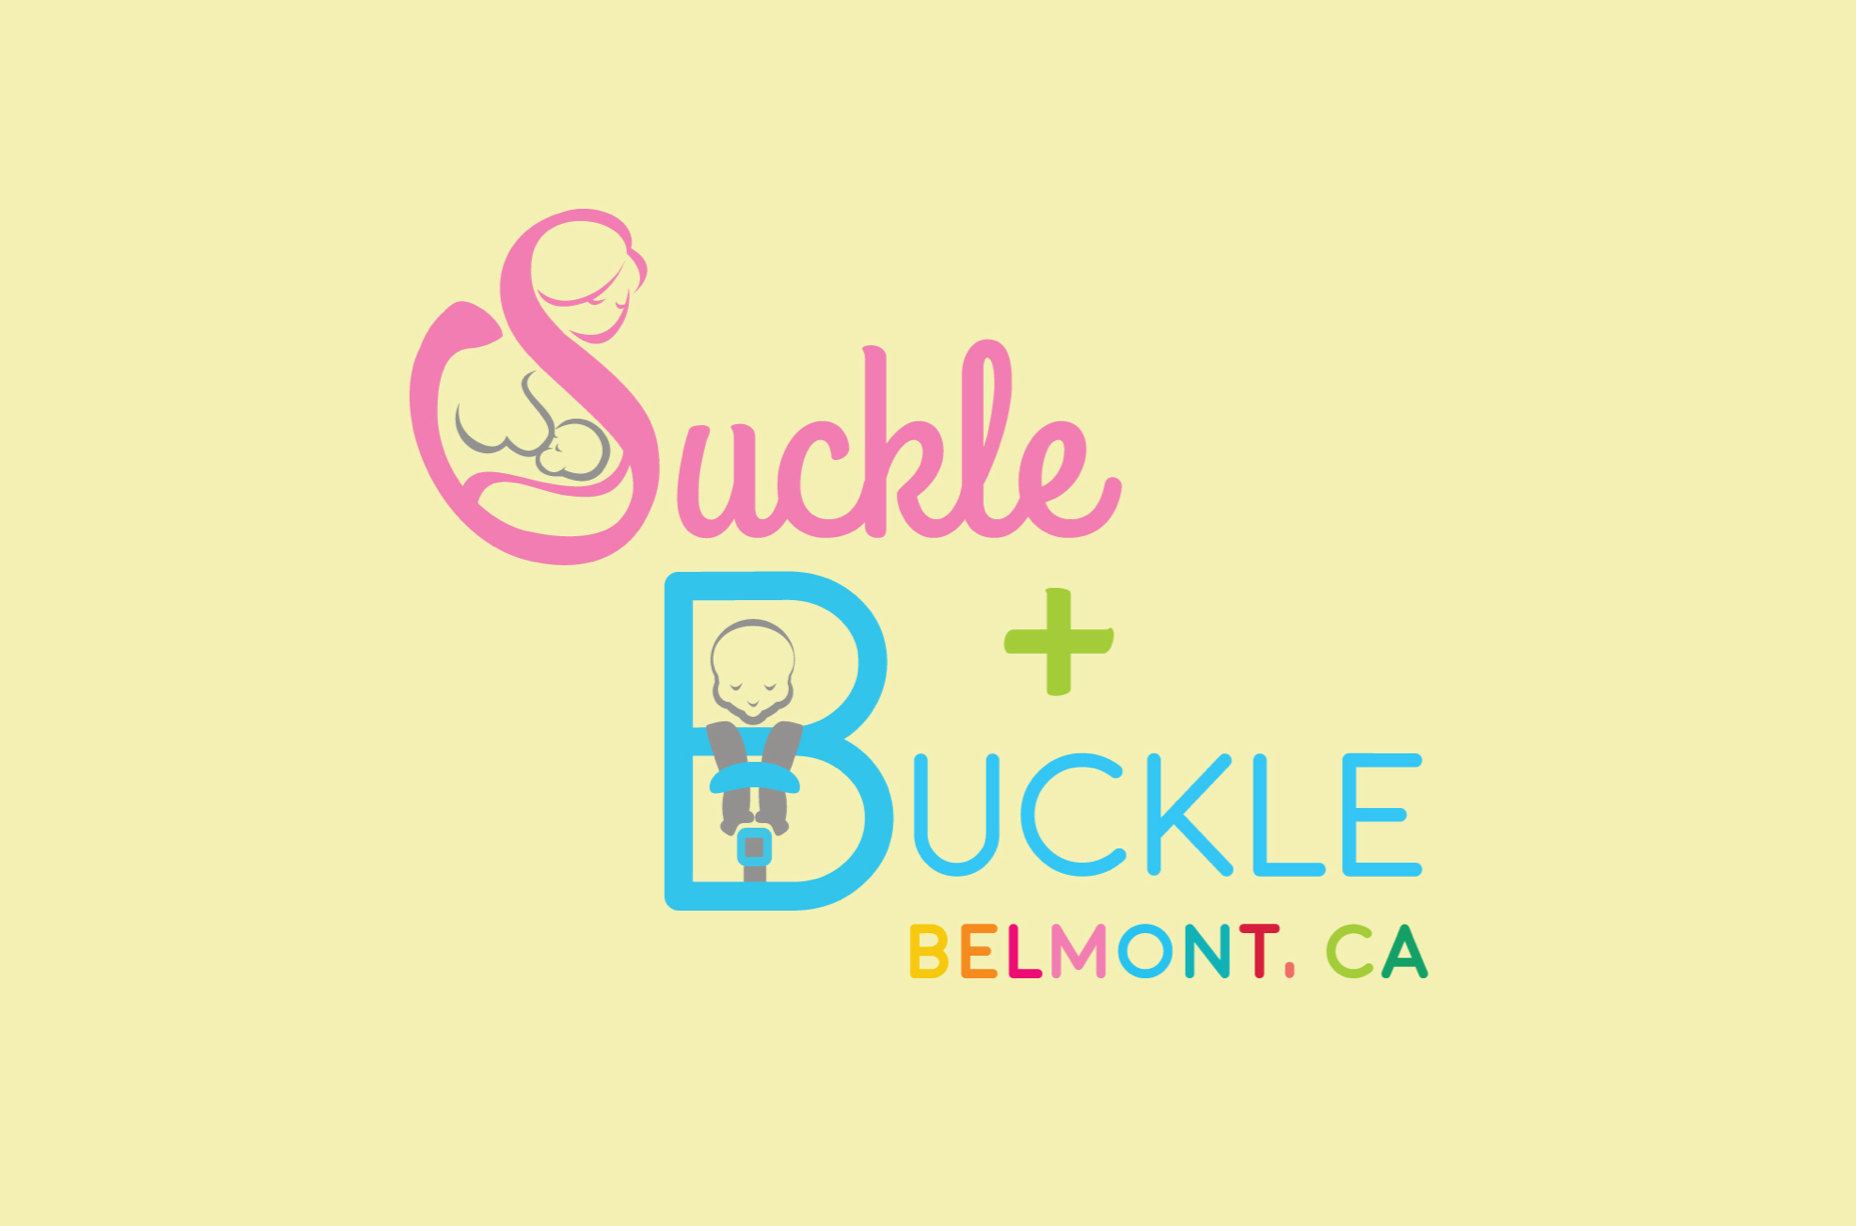 Suckle and buckle logo